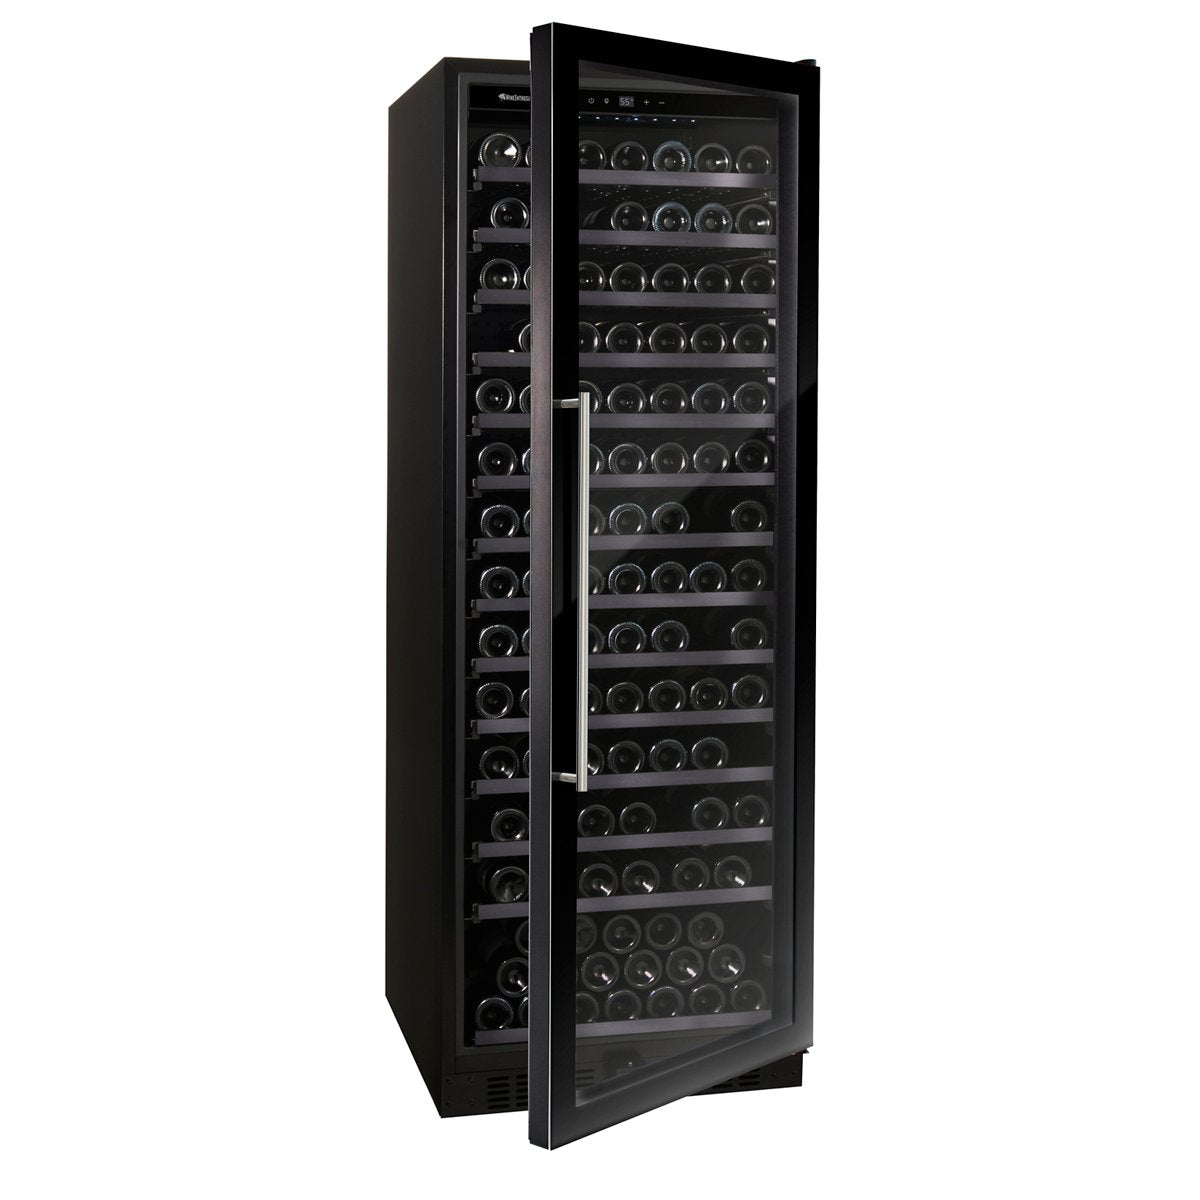 N'FINITY LXi Single Zone Wine Cellar with Steady-Temp™ Cooling (Edge-To-Edge Glass Door)